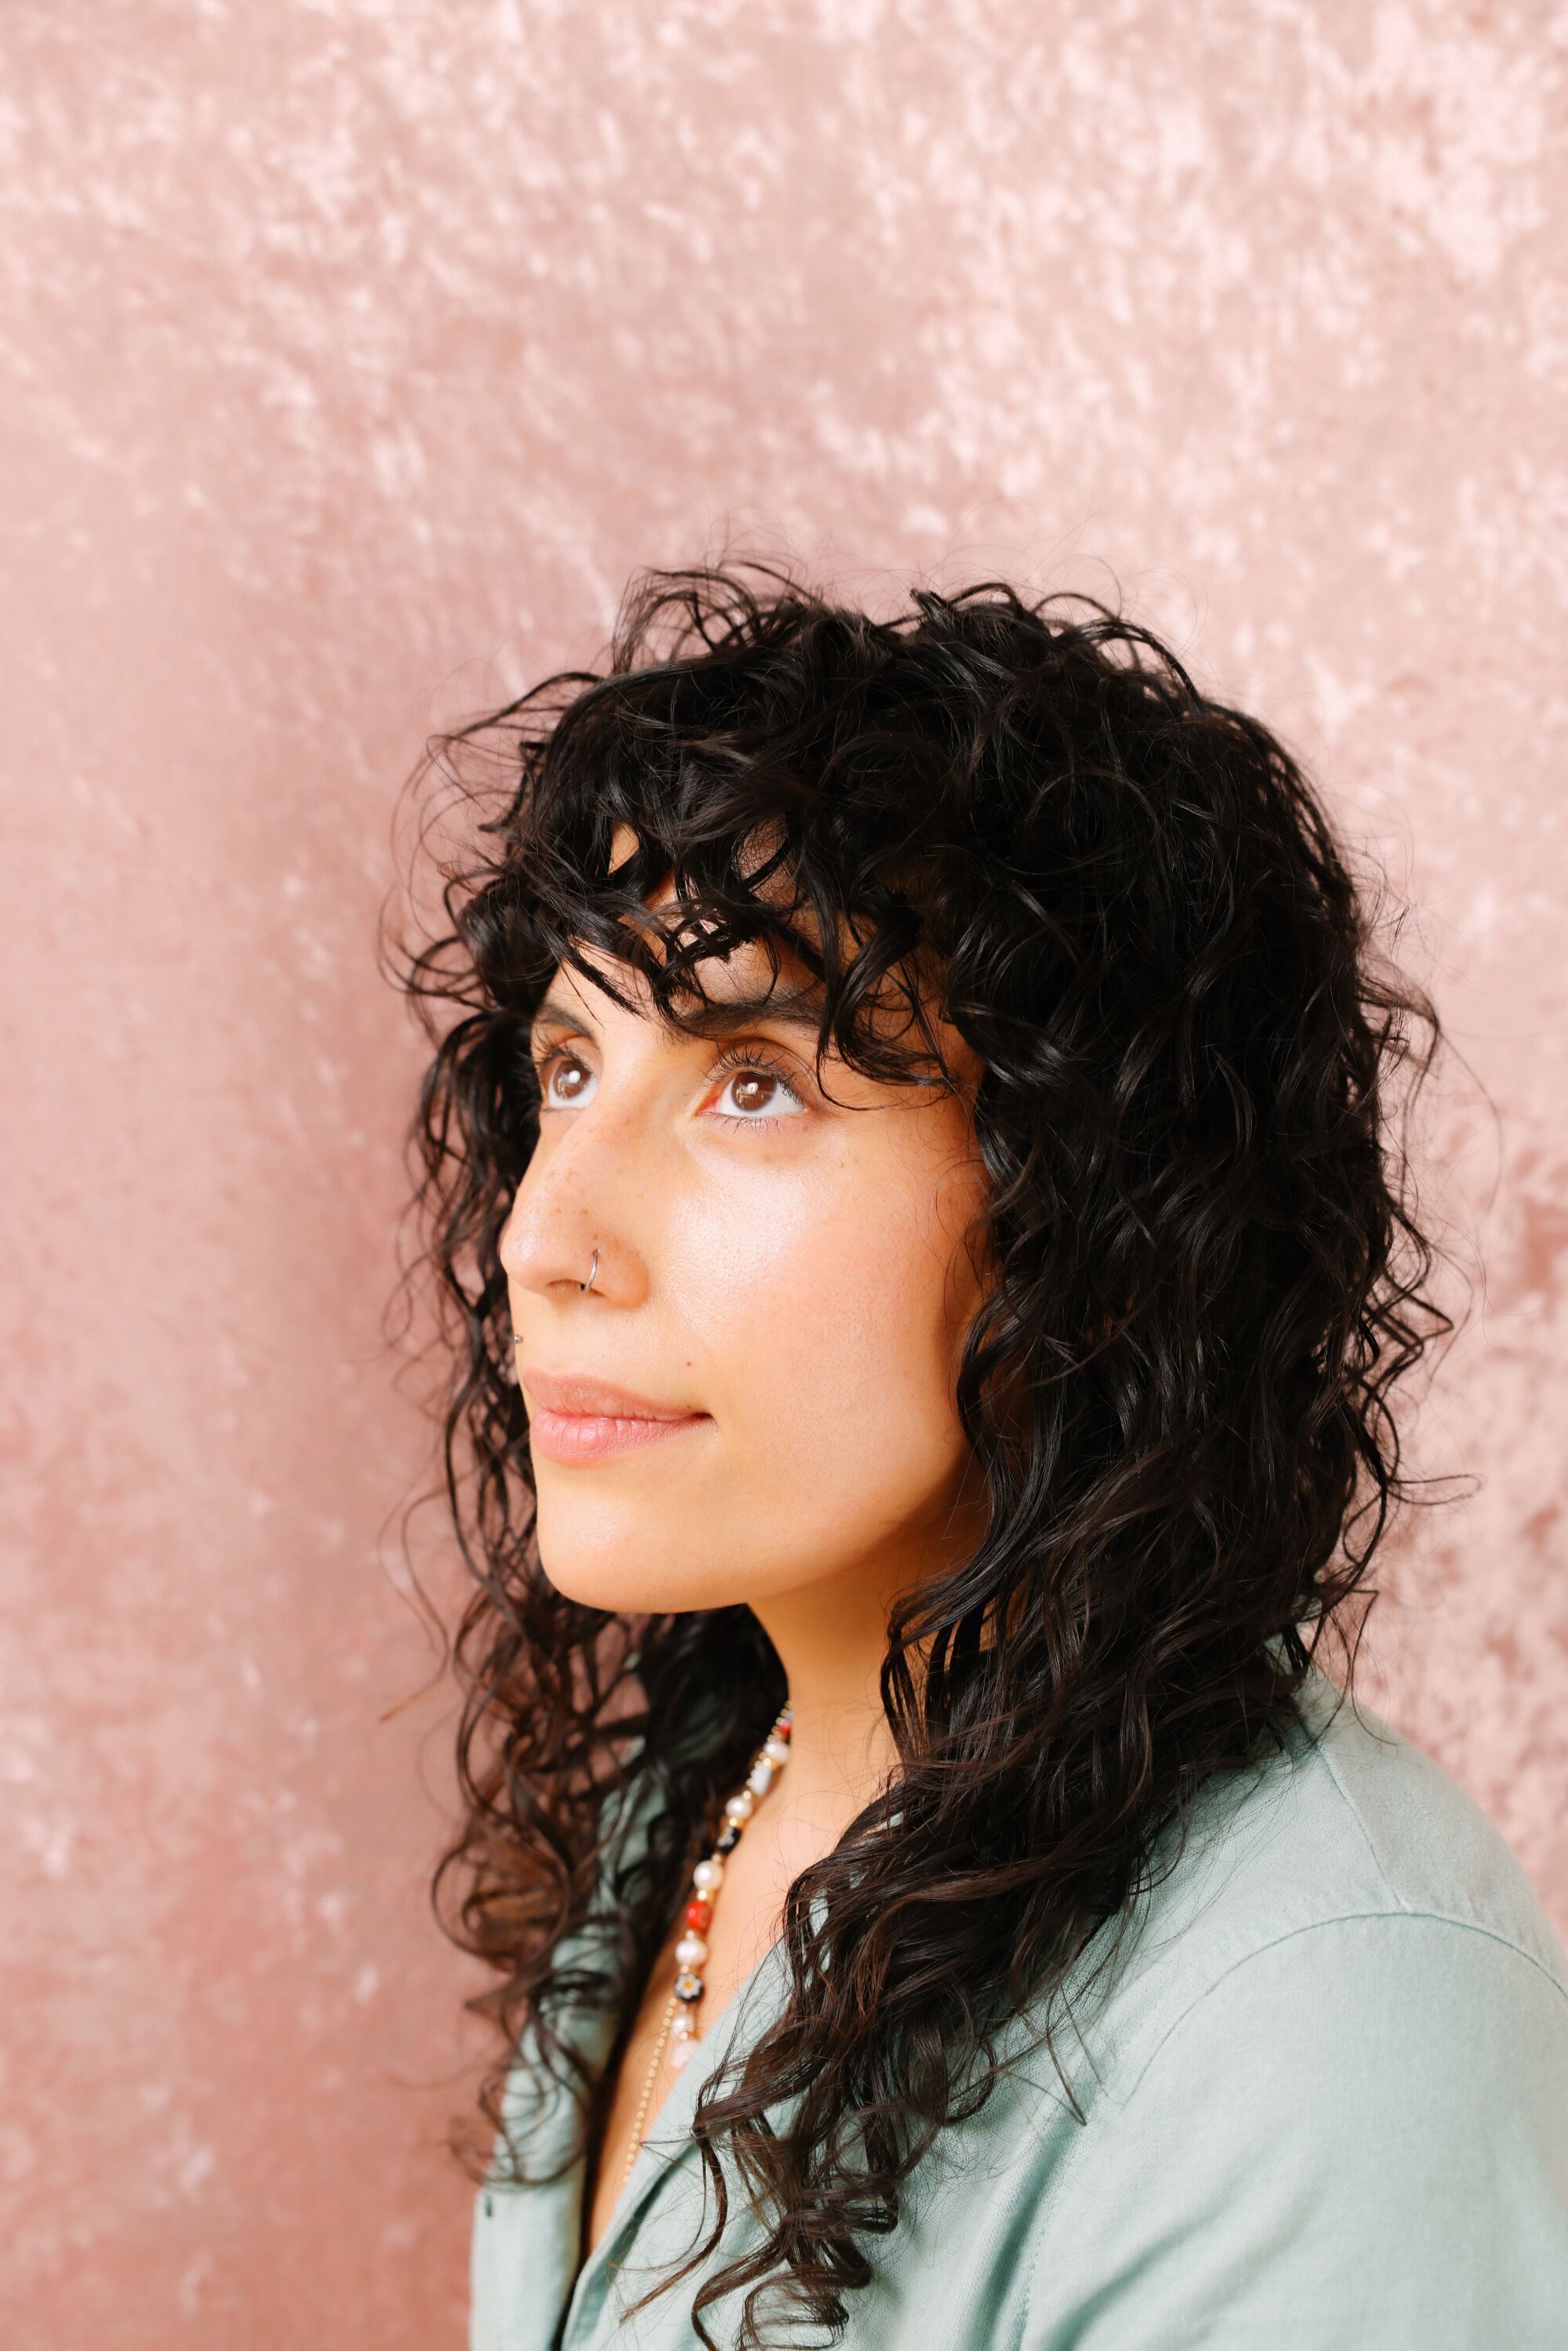 A person with curly long hair looks up for a portrait against a pink background.